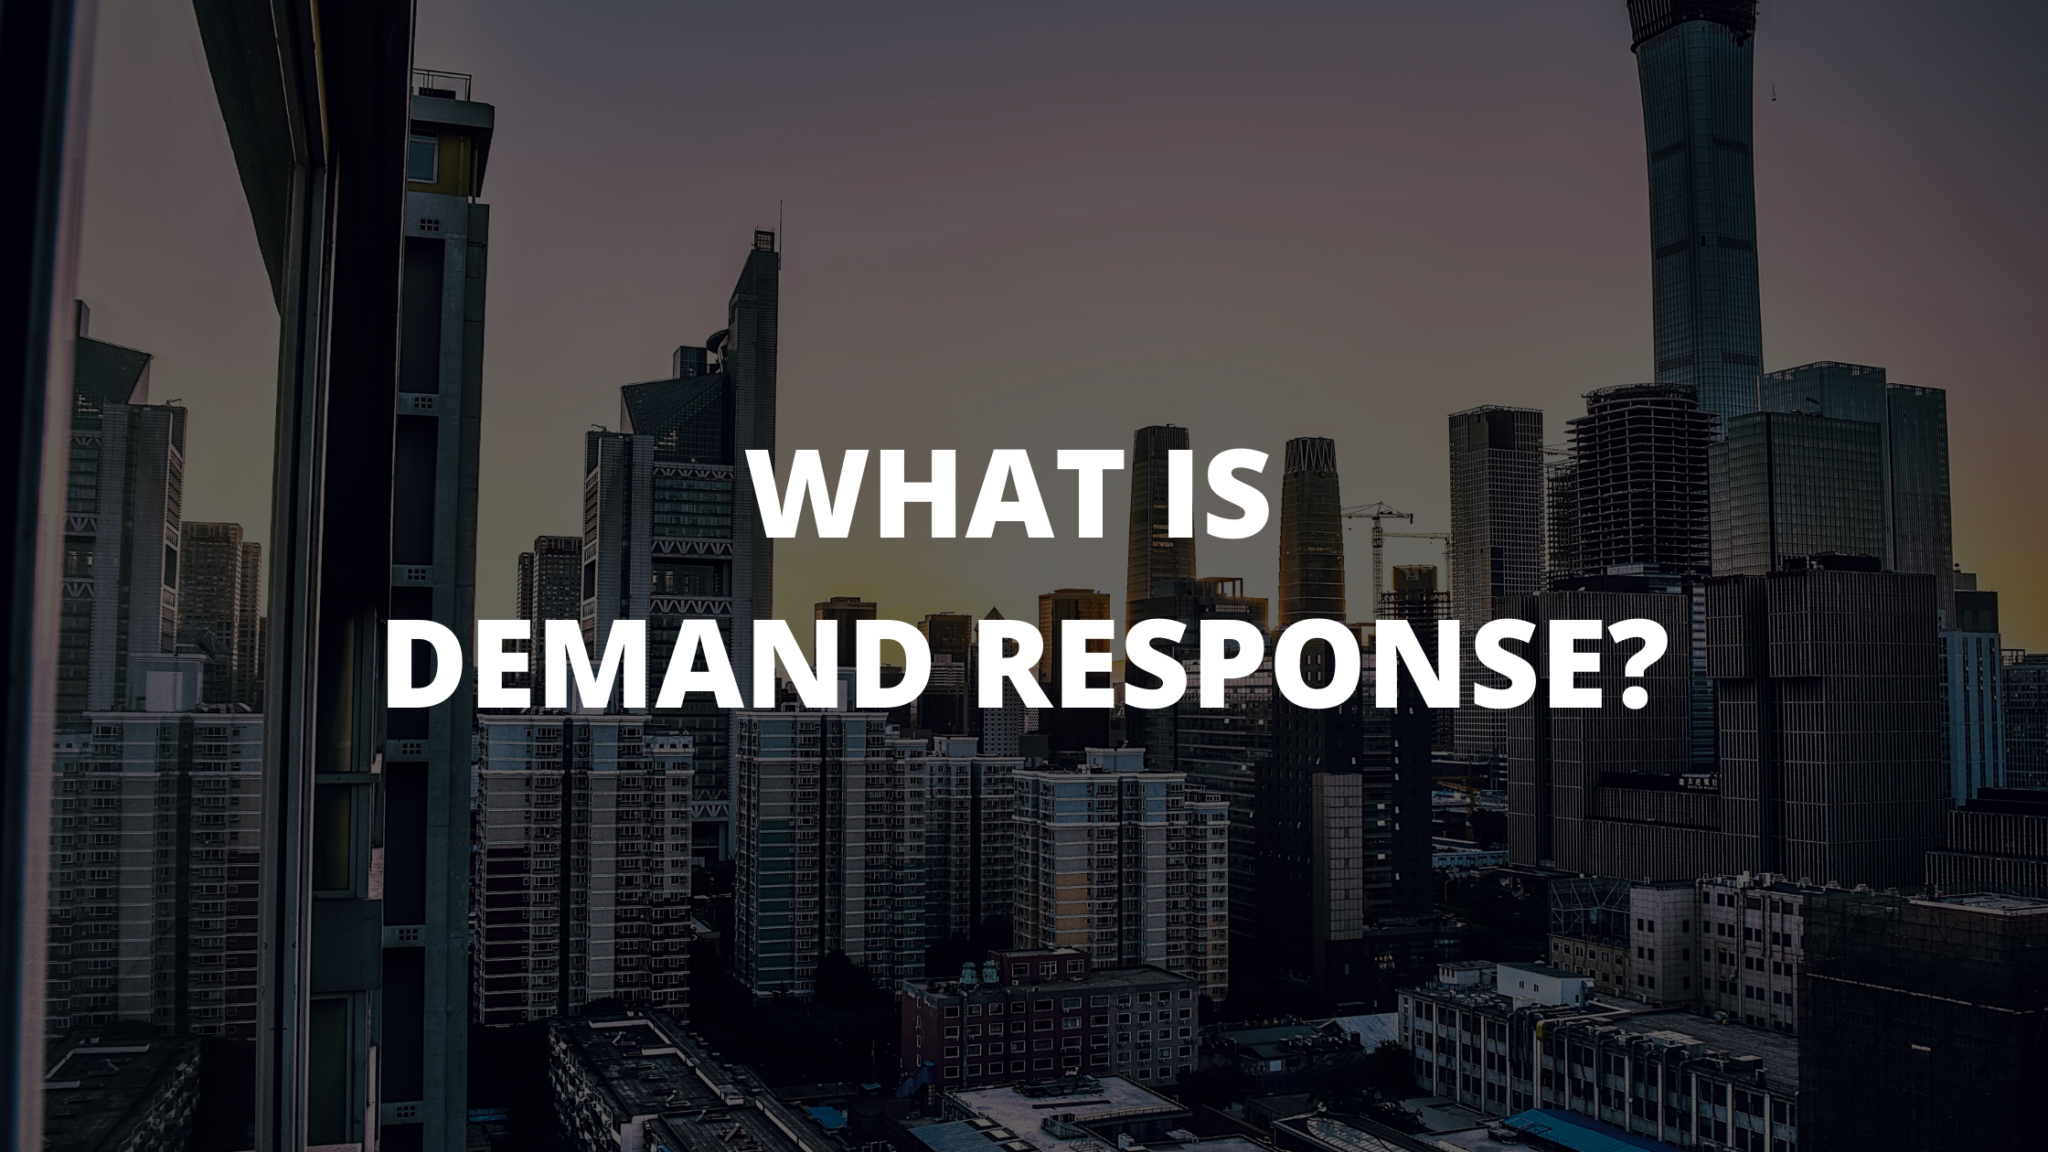 What is demand response?